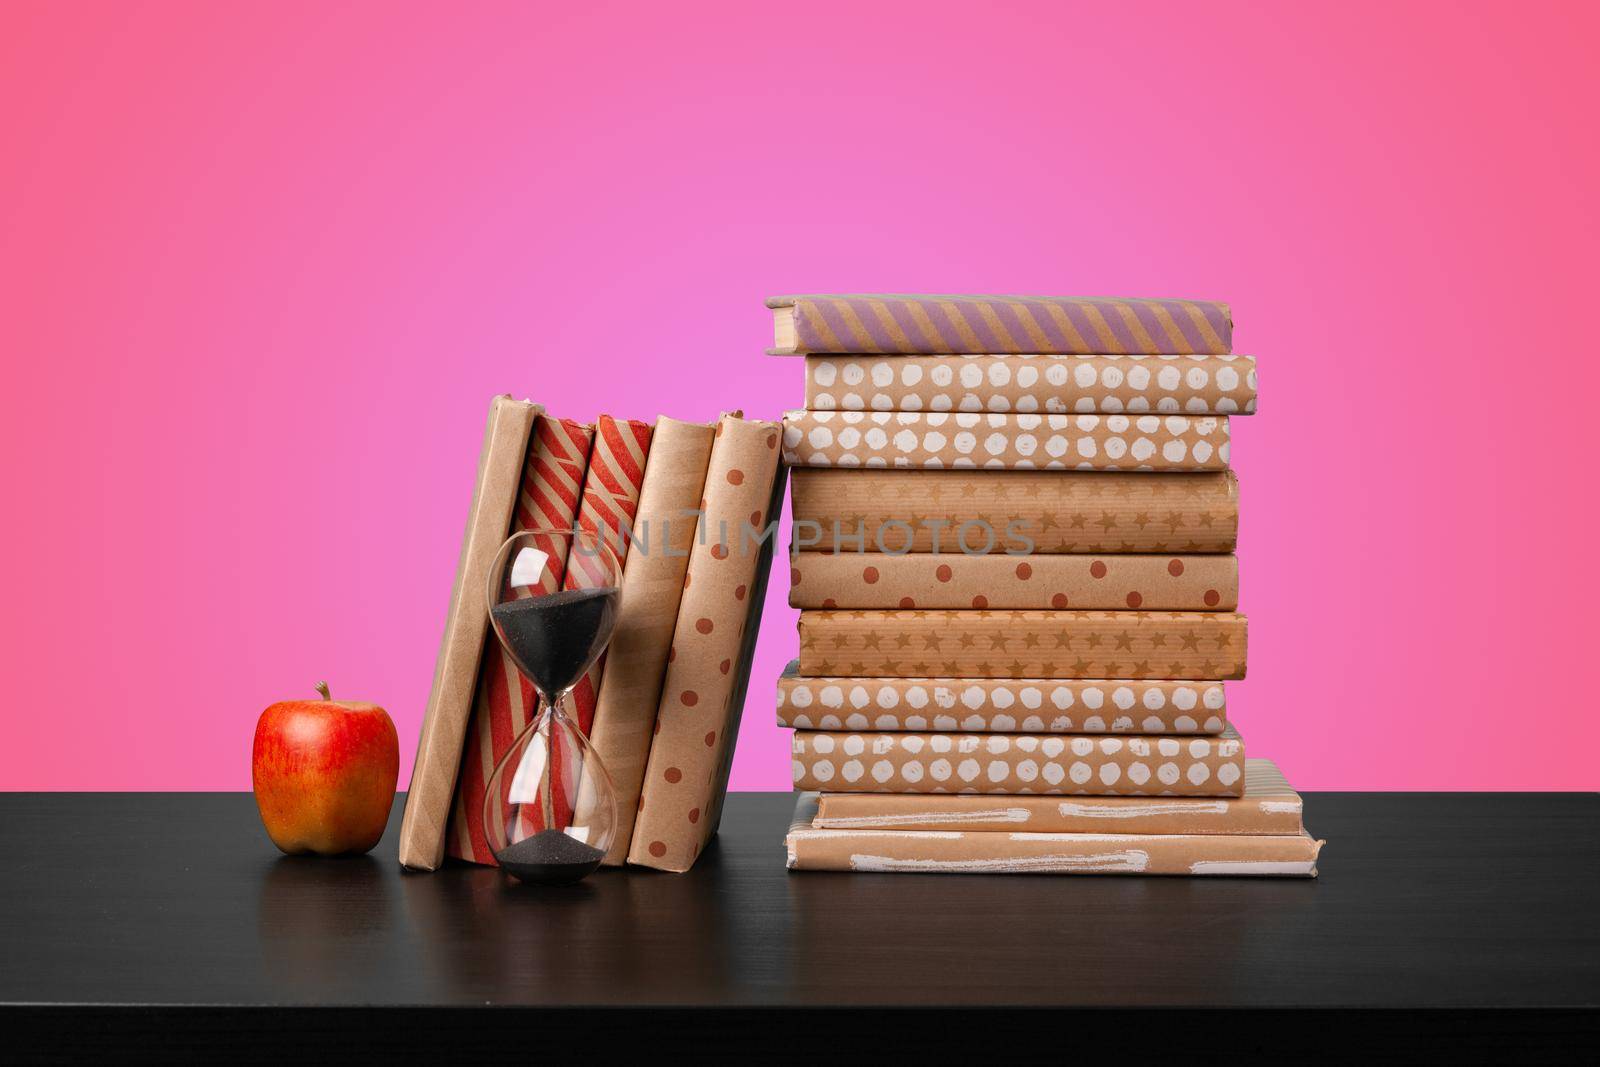 Education concept with stack of books on a table against colored background, front view